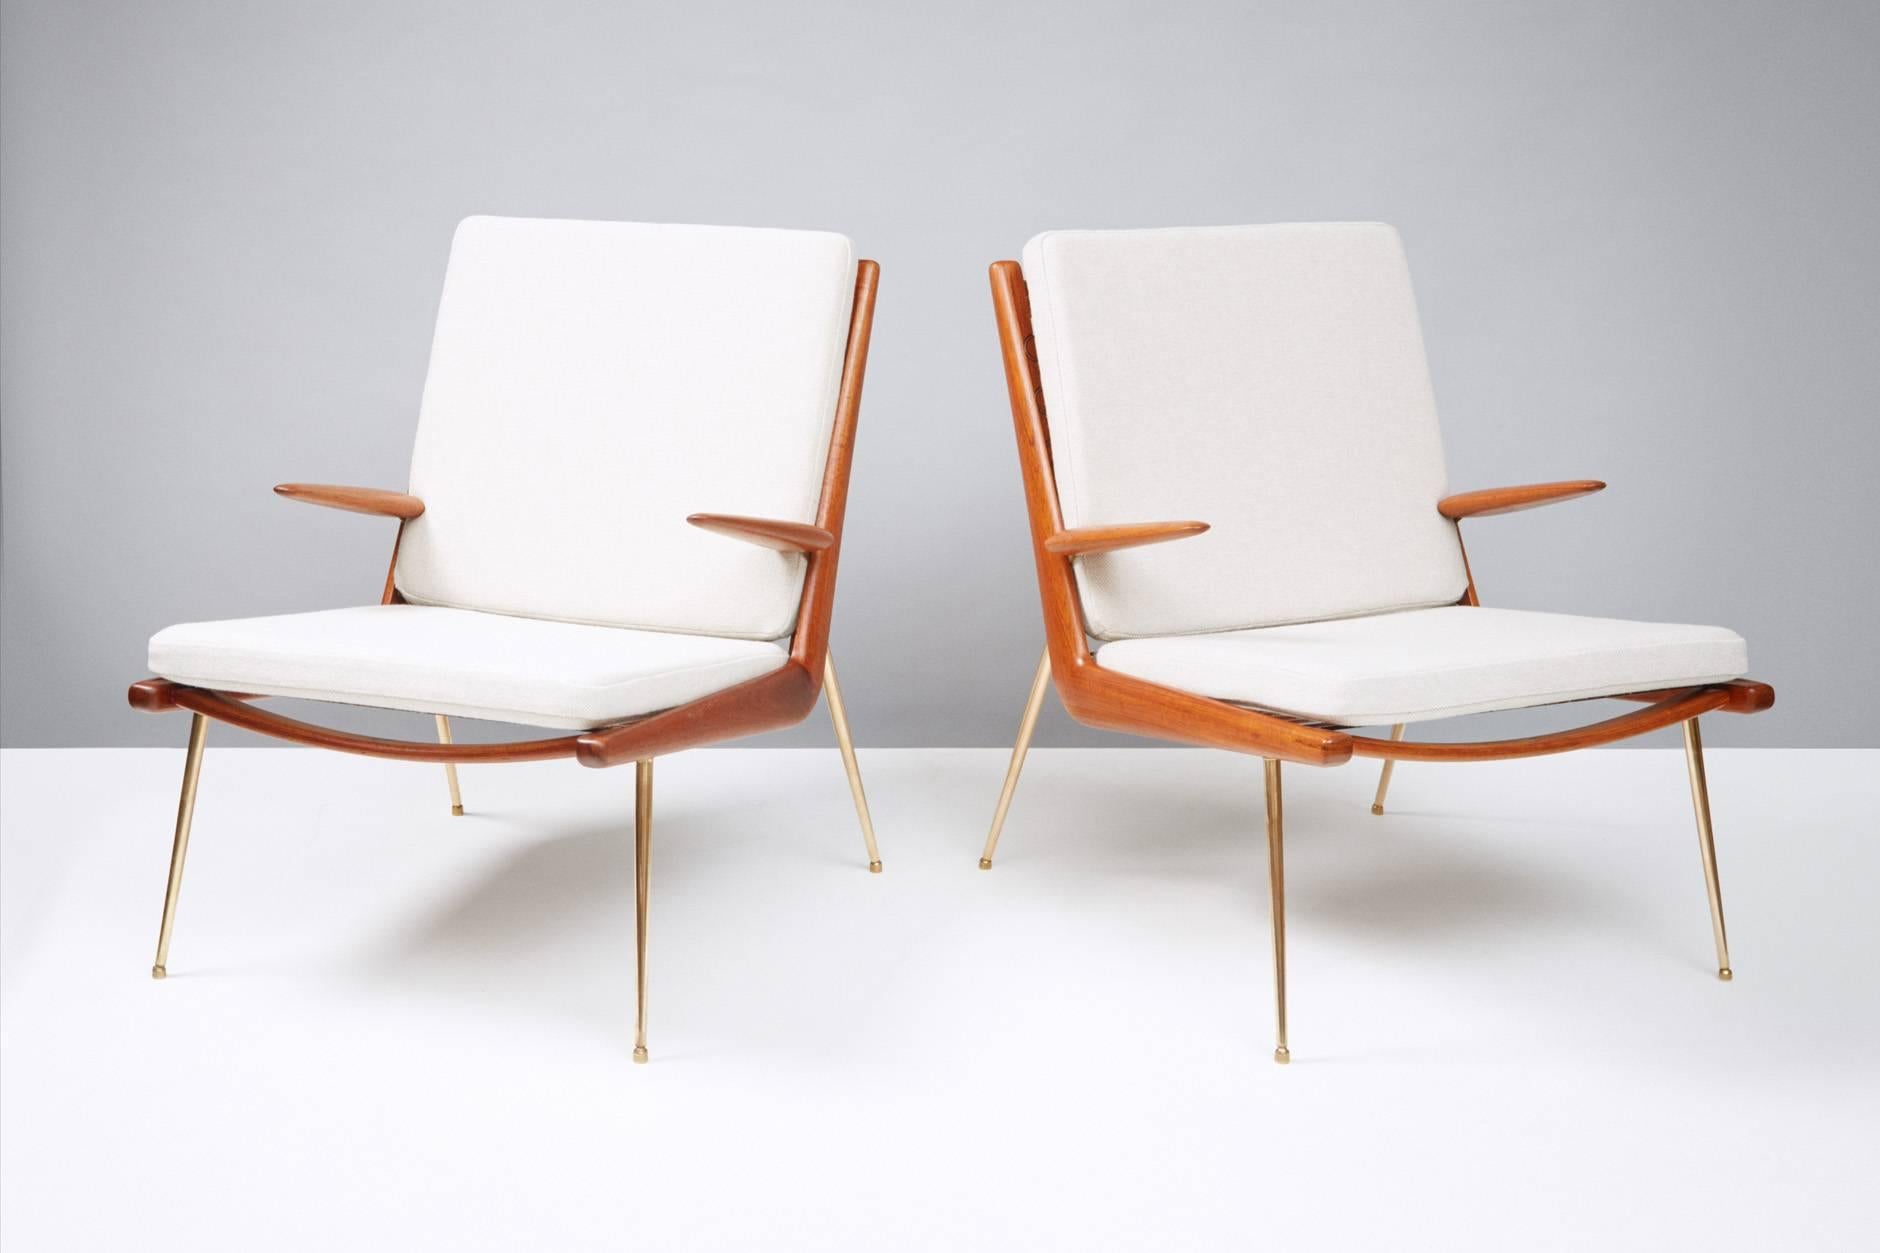 Produced by France & Daverkosen, Denmark. Teak frame with brass legs and fittings. New cushions covered in pale grey Kvadrat Hallingdal wool fabric.